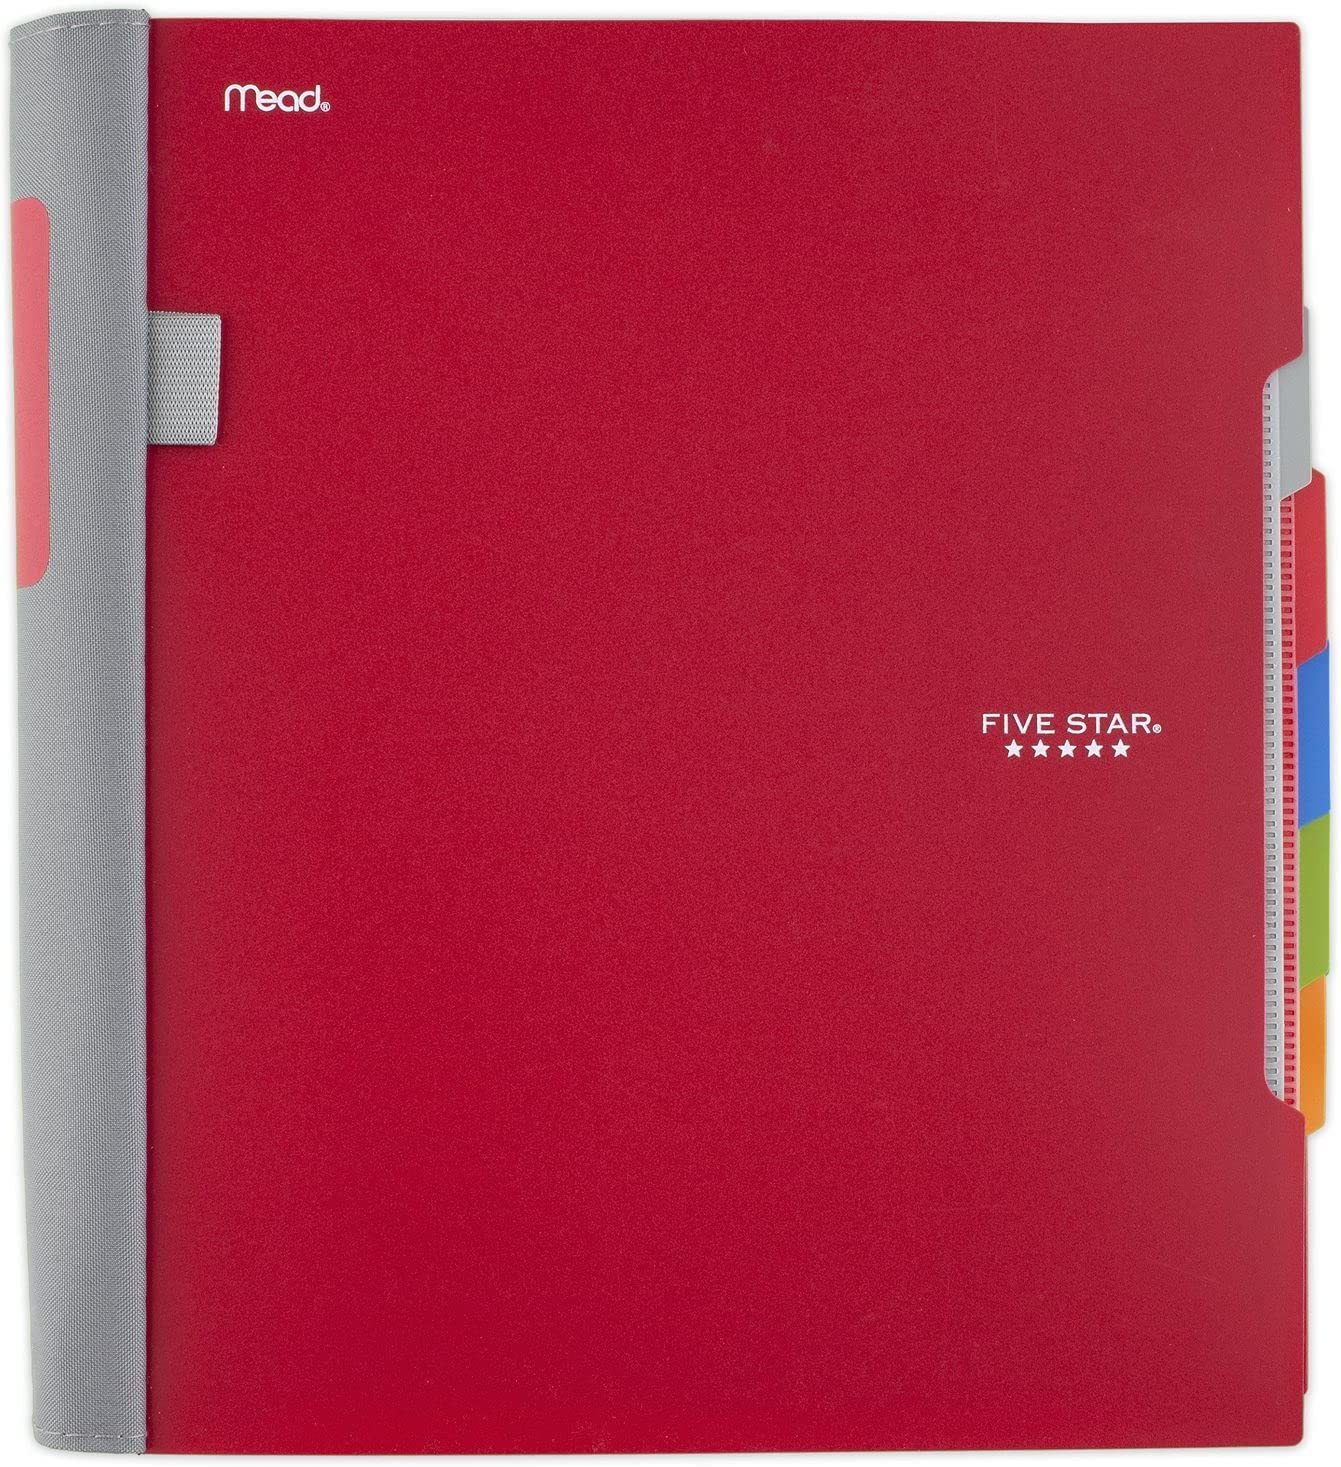 Primary image for Five Star Advance Spiral Notebook, 5-Subject, College Ruled Paper,, Red (73146).